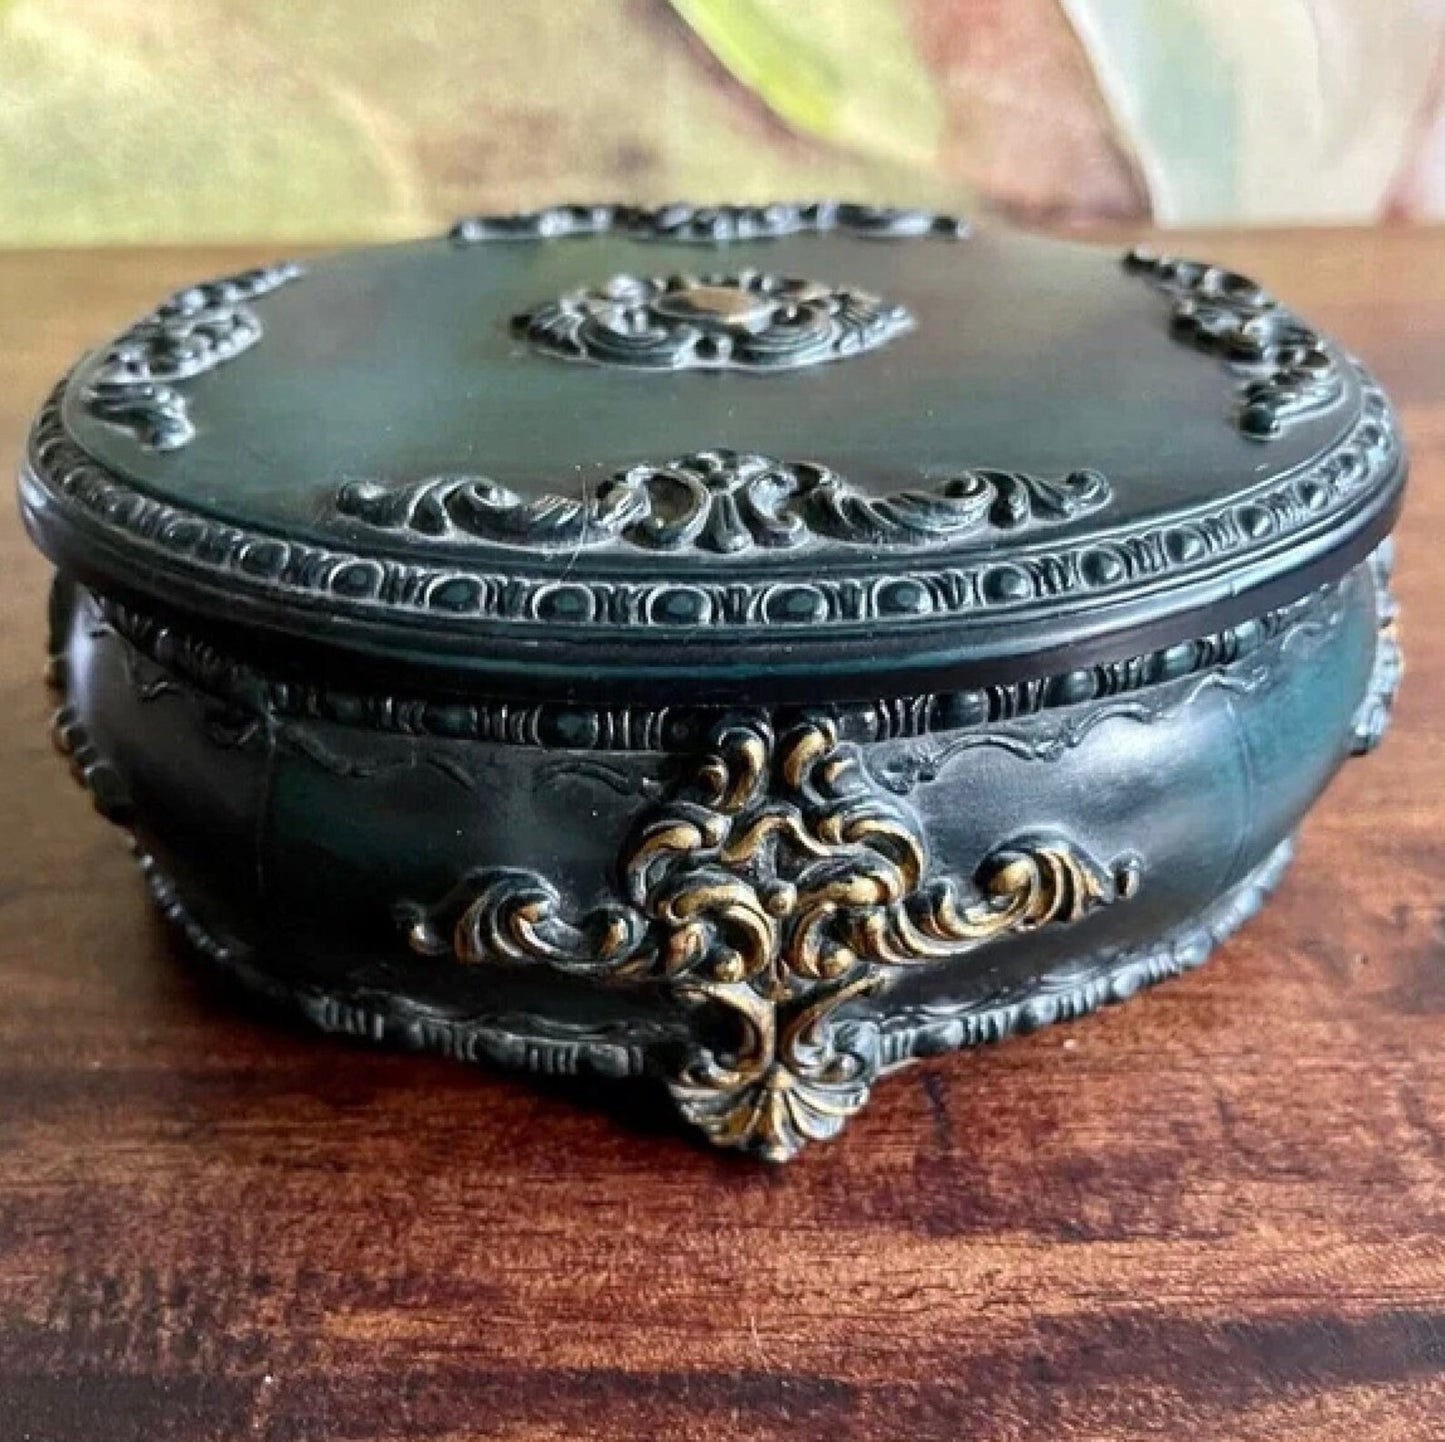 Vintage Glam Resin Trinket Box, French Country